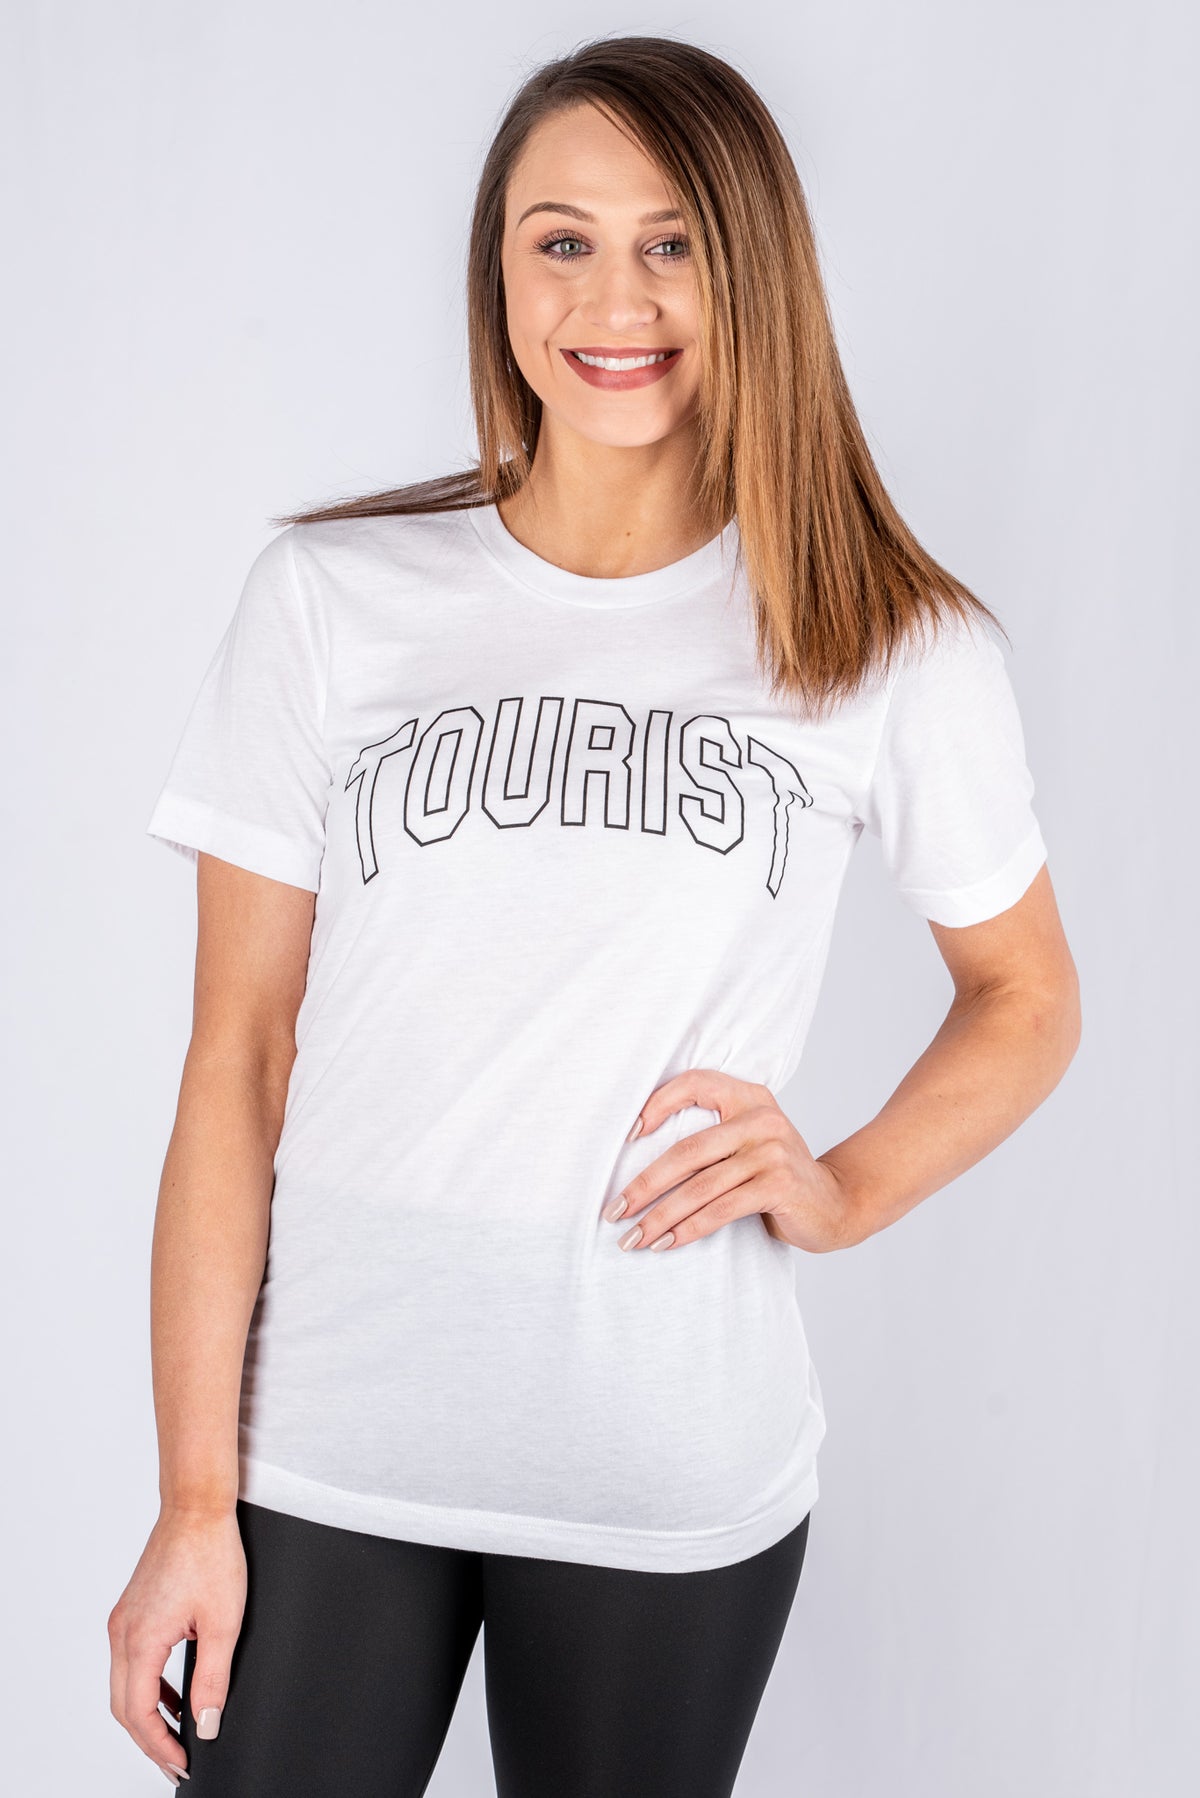 Tourist unisex short sleeve t-shirt white - Stylish T-shirts - Trendy Graphic T-Shirts and Tank Tops at Lush Fashion Lounge Boutique in Oklahoma City